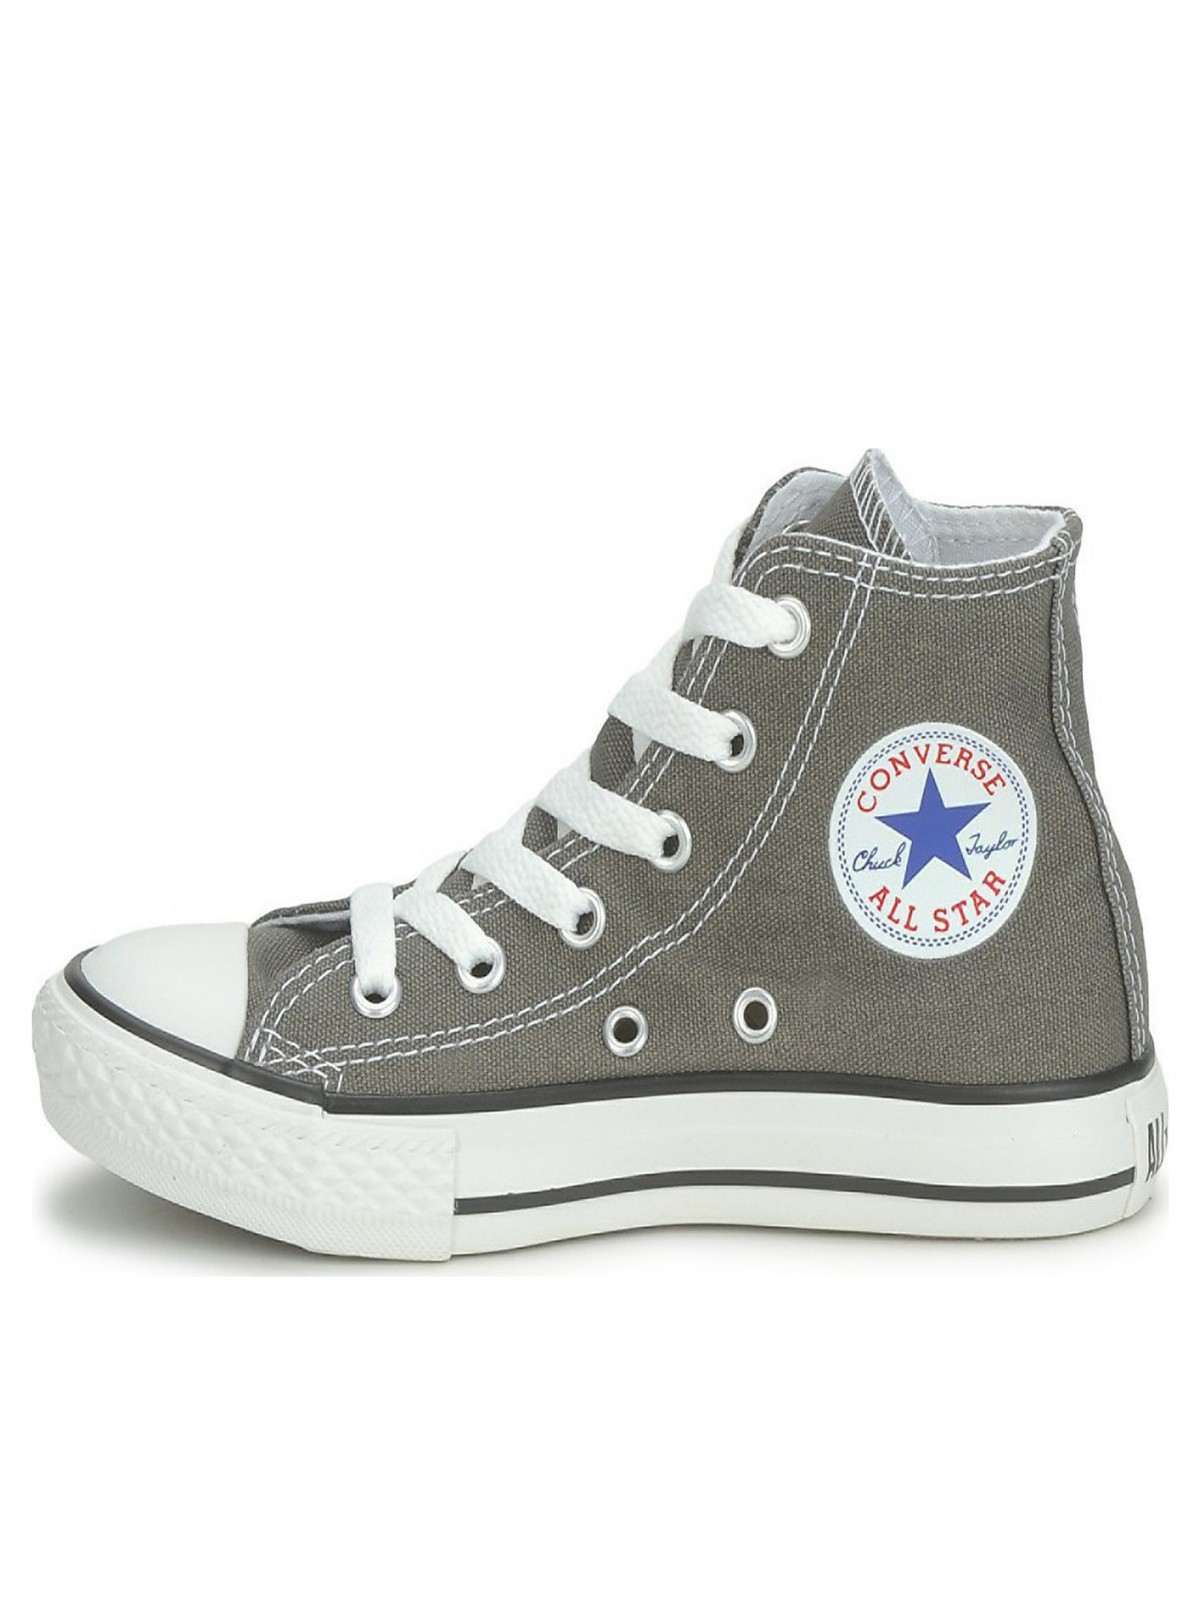 Converse Cadet Chuck Taylor all star anthracite